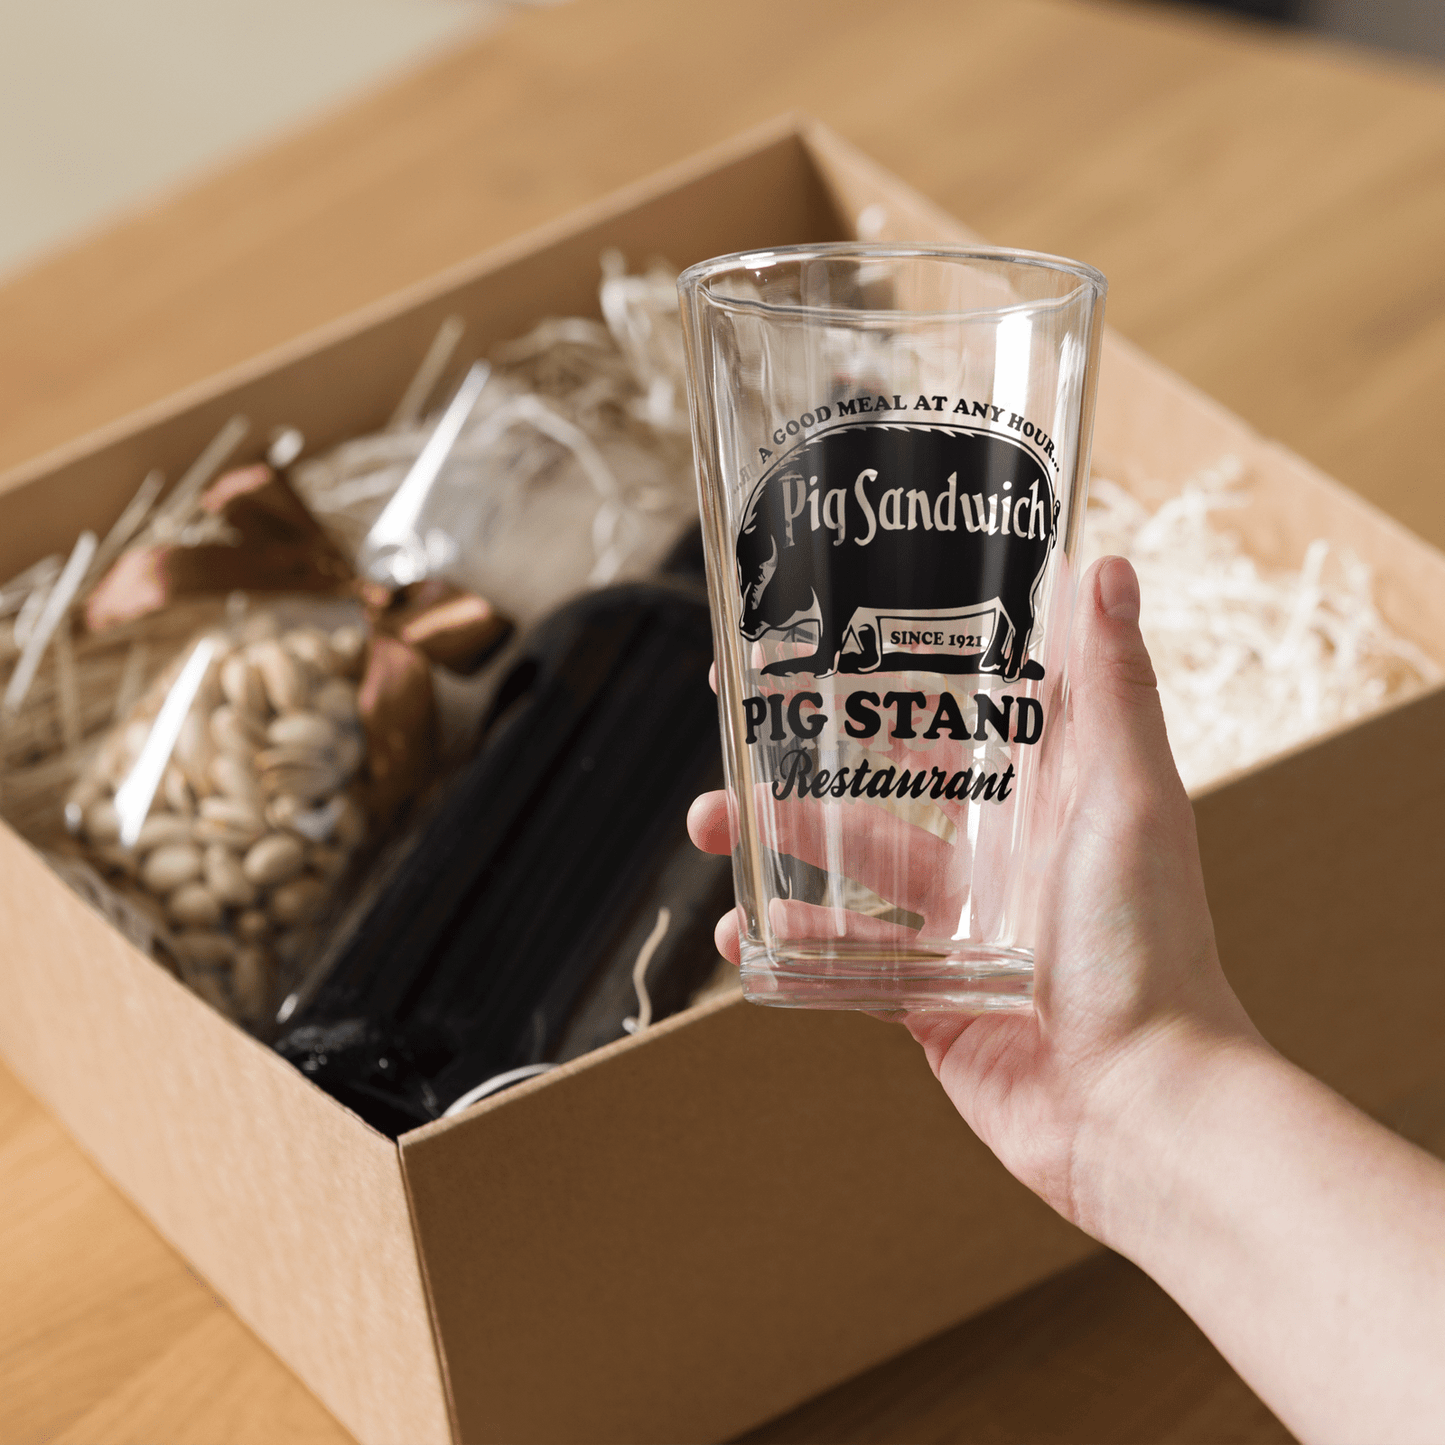 Pig Stand Shaker Pint Glass